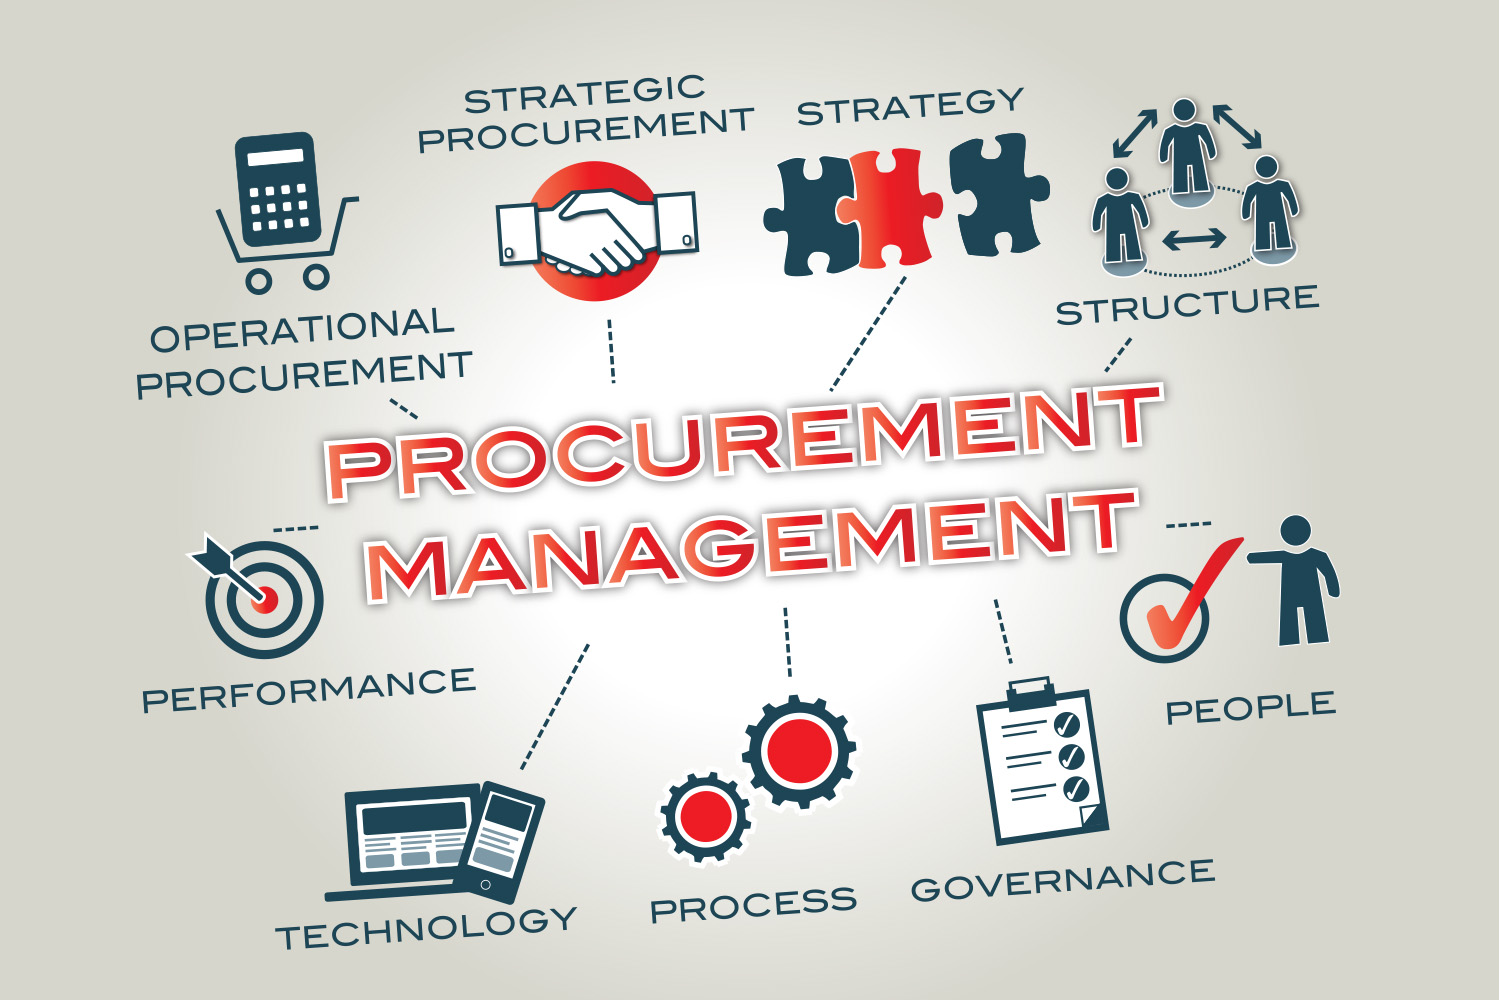 U-LEAD helps municipalities to understand public procurement for budget funds